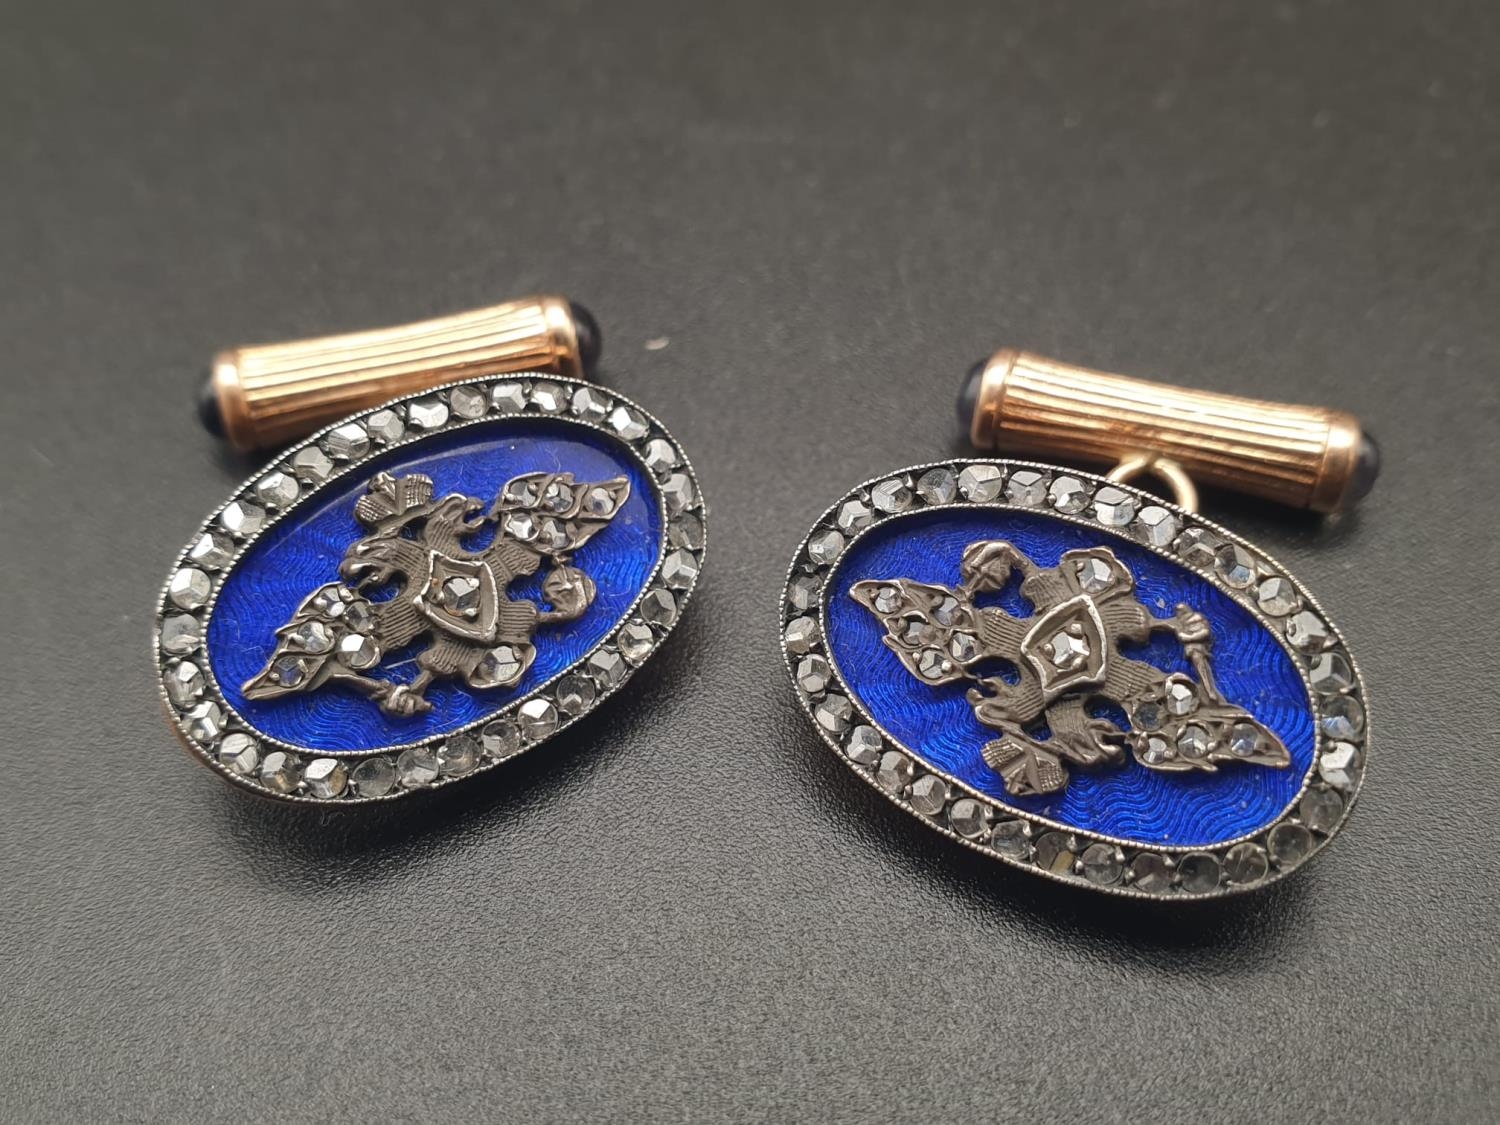 Russian 14k gold with blue enamel diamond and sapphire cufflinks. 17.8gms.